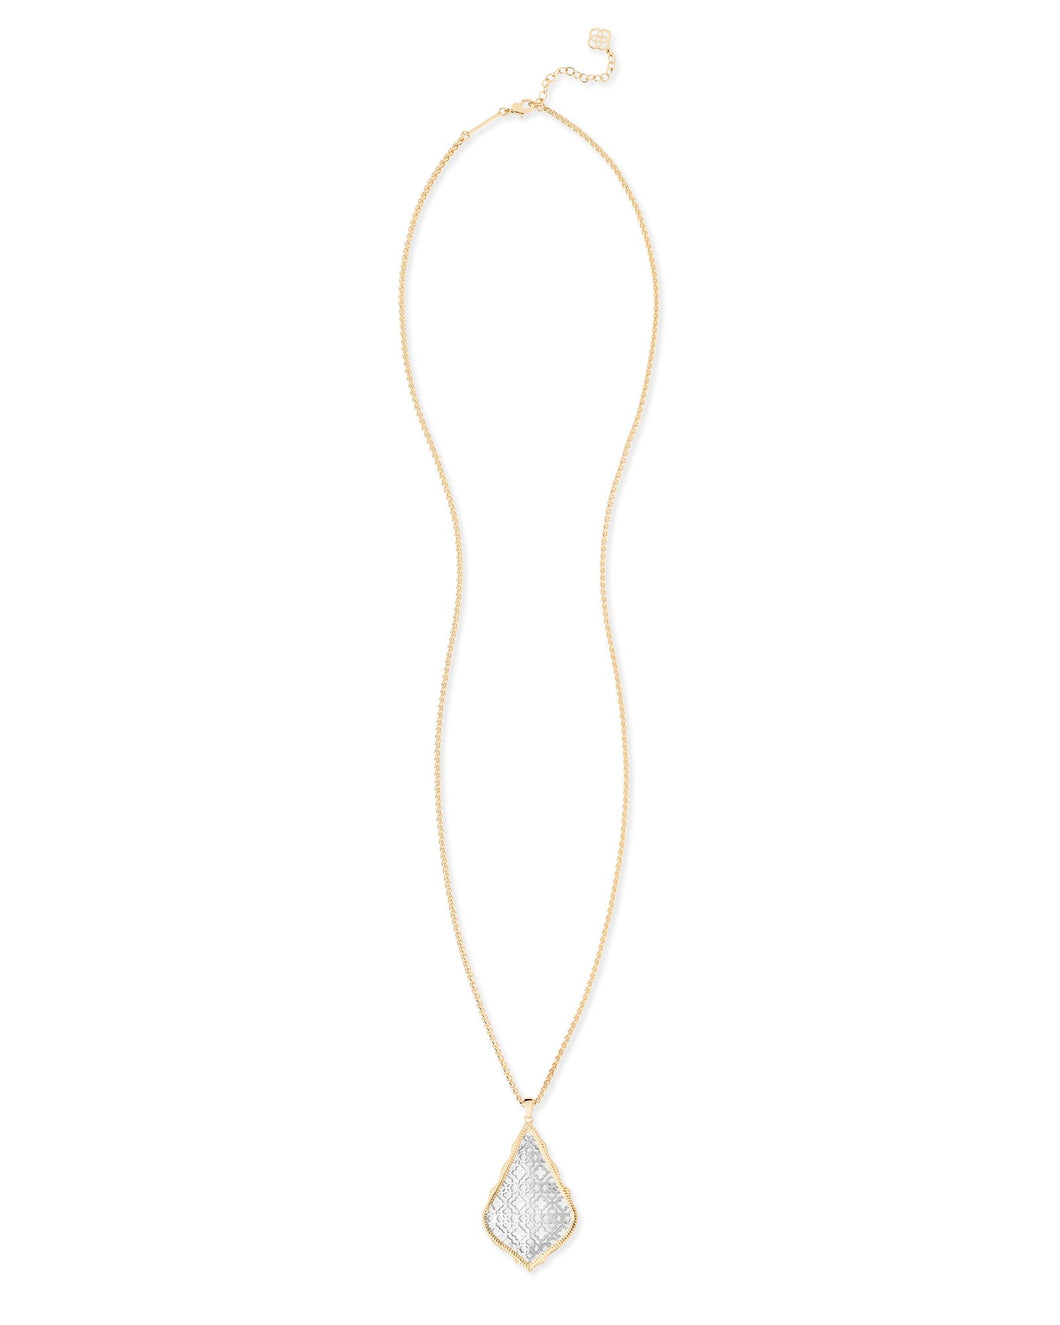 Aiden Gold Long Pendant Necklace in Silver Filigree Mix